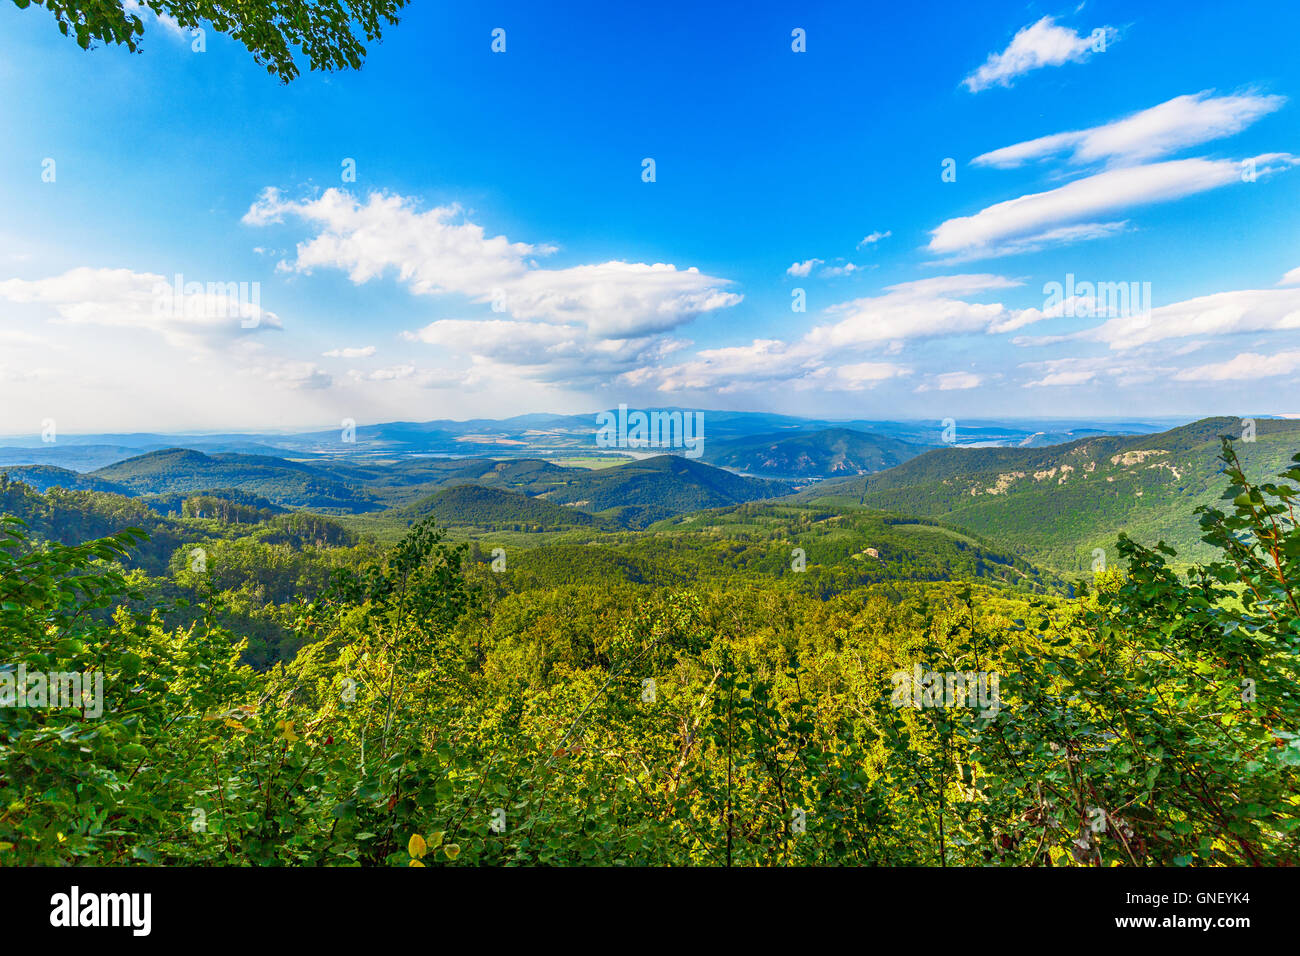 Mountain valley with Danube in background, natural summer landscape Stock Photo